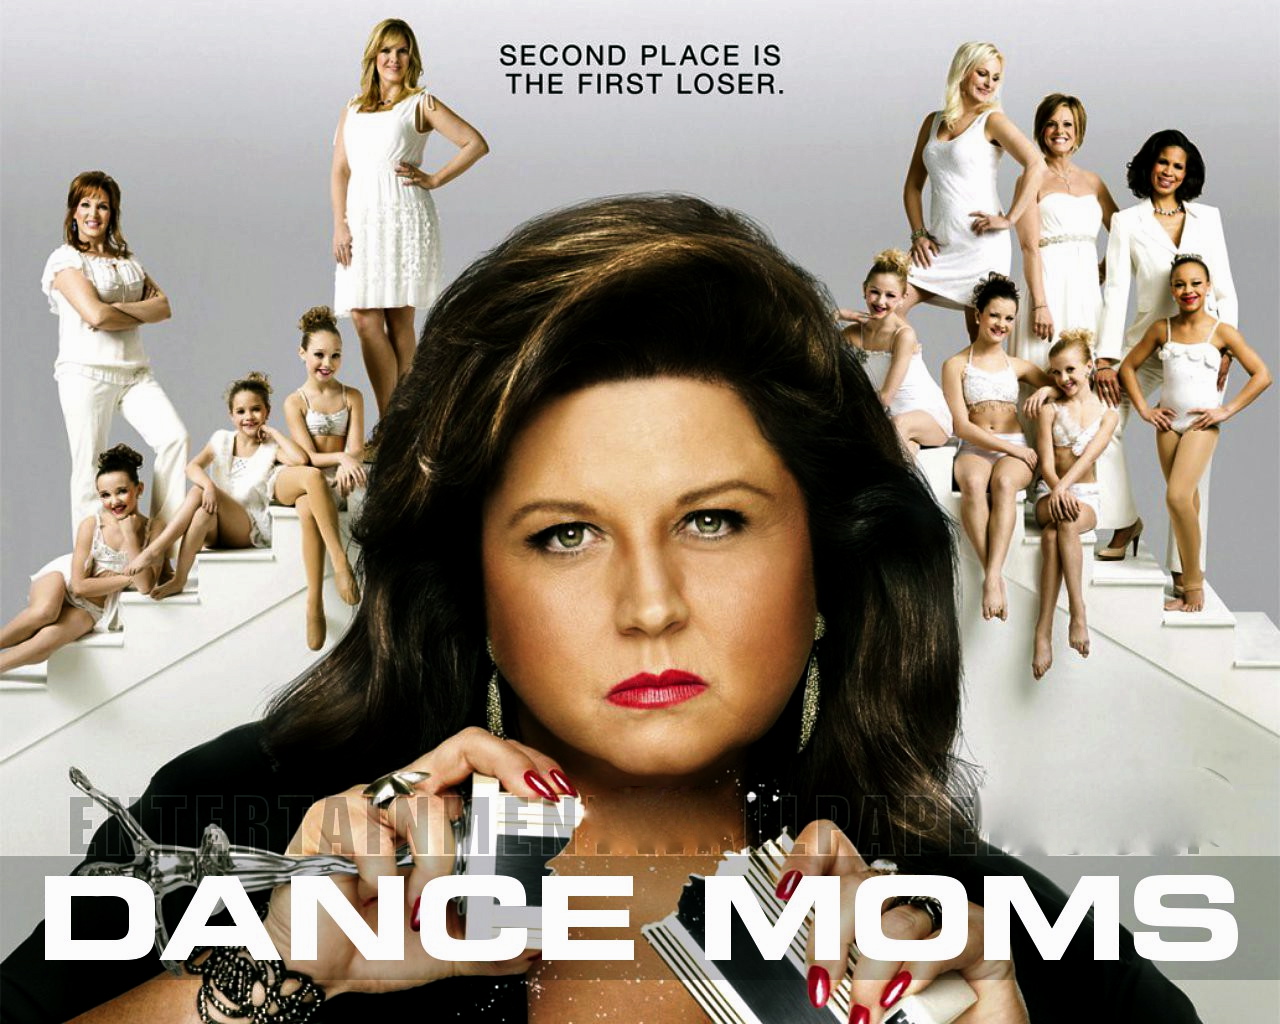 We're Wicked Smaht: Dance Moms Are Evil
